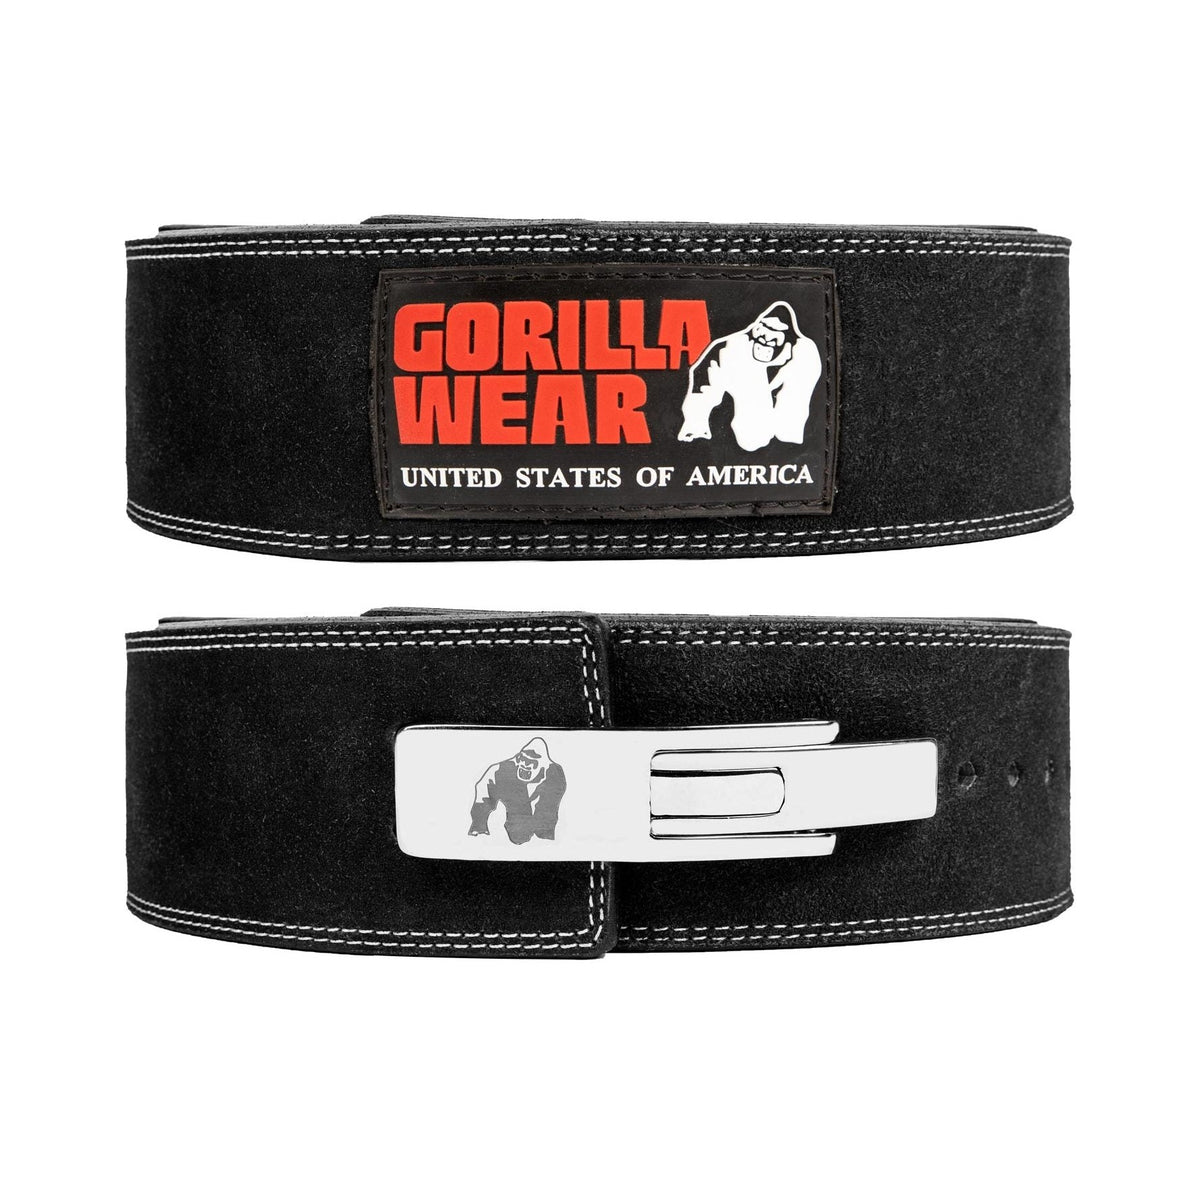  GORILLA WEAR Lifting Wrist Wraps for Weightlifting,  Bodybuilding, Powerlifting, Strength Training & Deadlift - Padded Pair in  Black and Red Black : Gorilla Wear: Sports & Outdoors